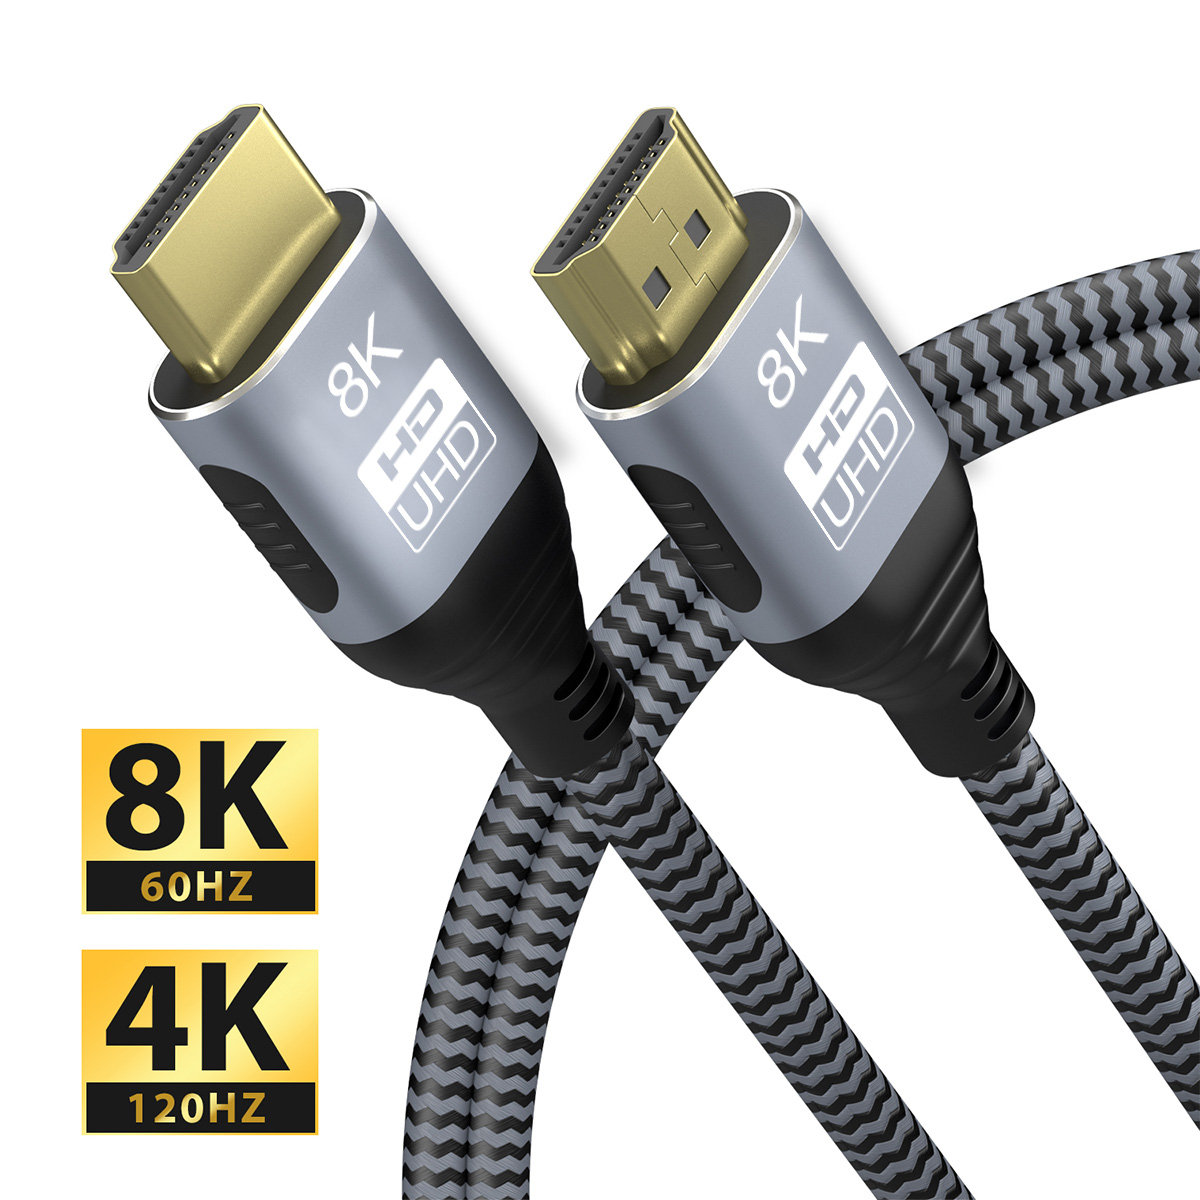 CABLEDECONN 8K HDMI Cable UHD HDR 8K(7680x4320) High Speed 48Gbps 8K@60Hz  4K@120Hz HDCP2.2 HDR eARC 3D HDMI Cable for PS4 SetTop Box HDTVs Projector